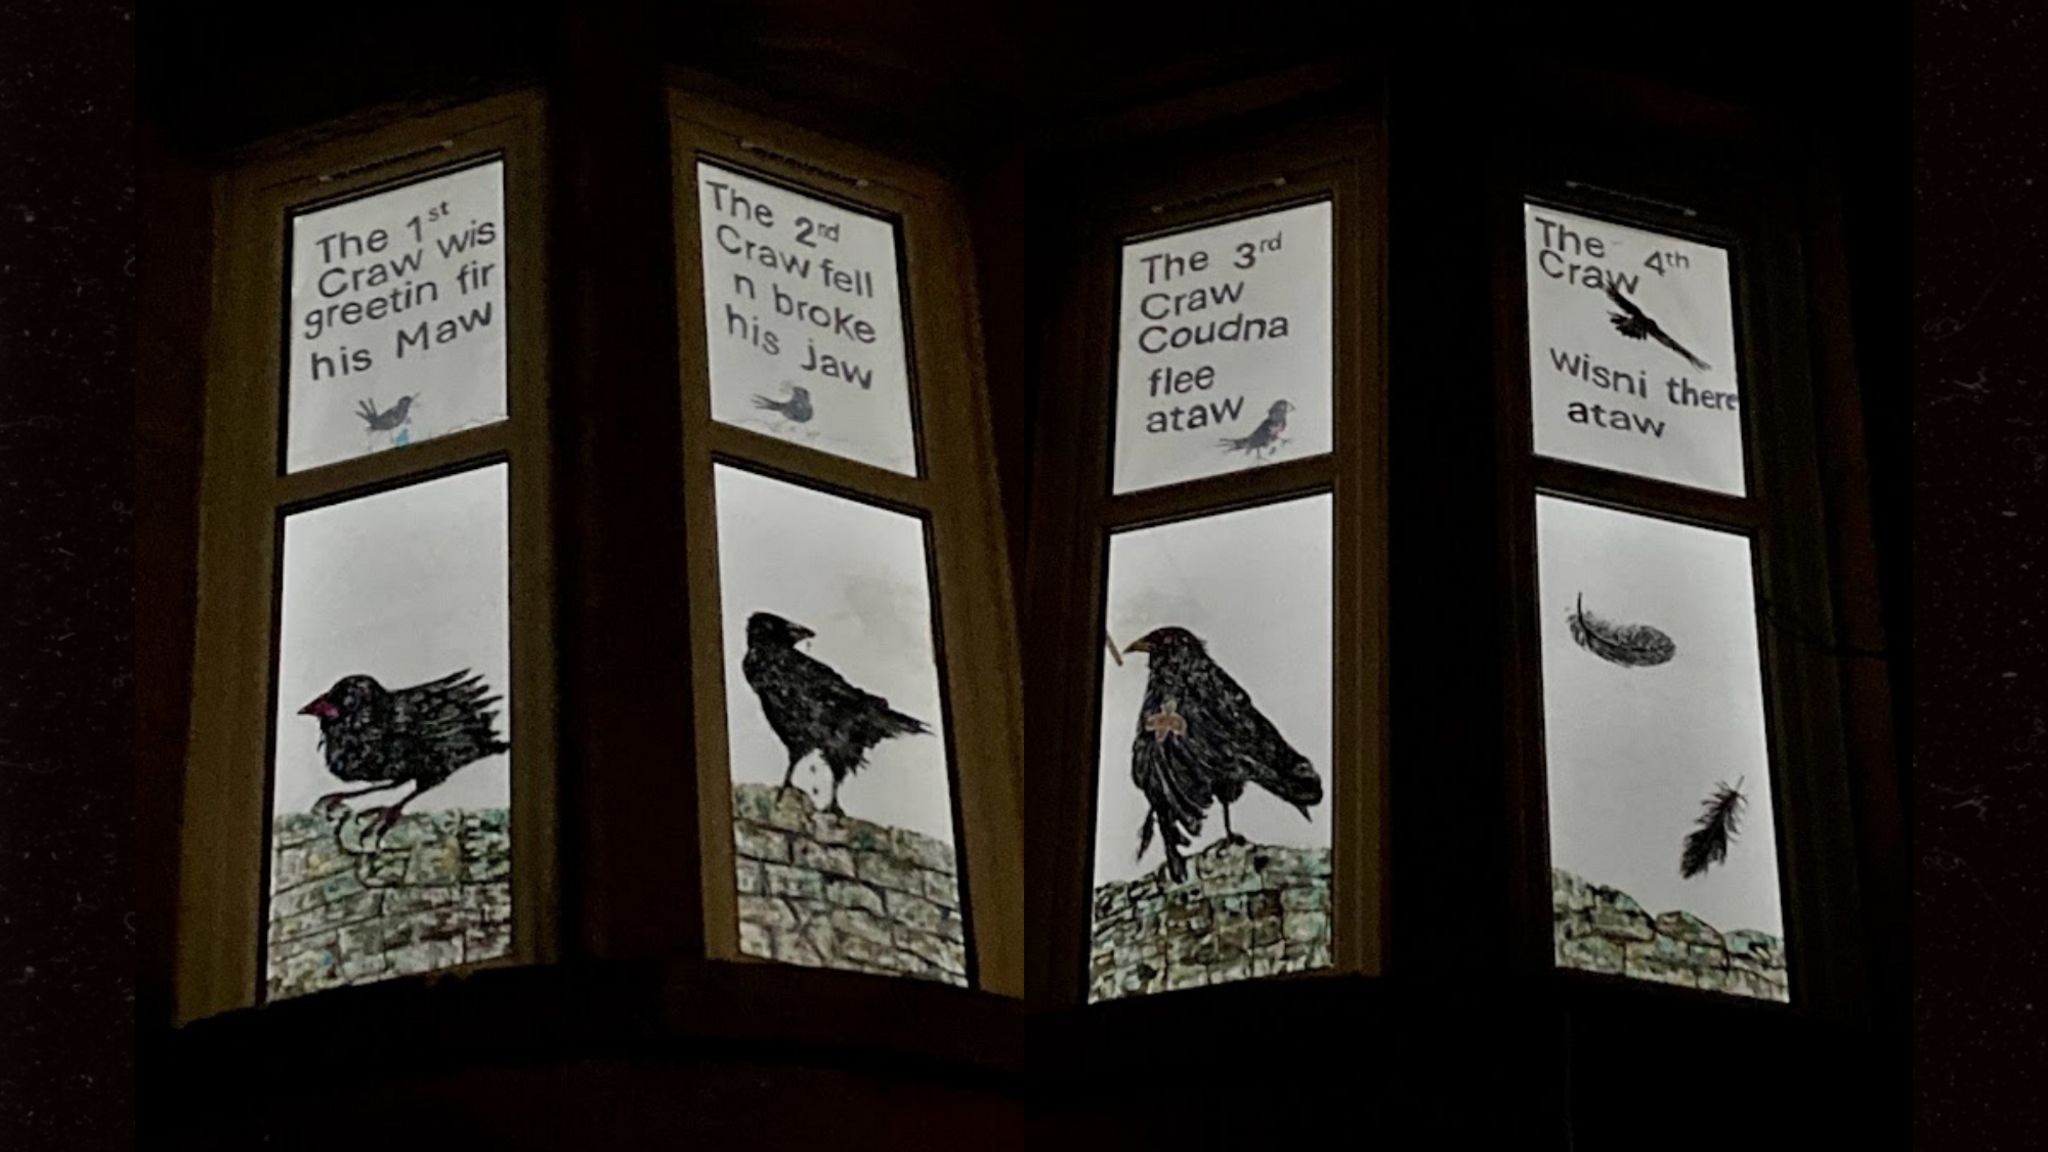 An illustrated rhyme over four windows reads: "The 1st craw wis greetin fir his maw, the 2nd craw fell n broke his jaw, the 3rd craw coudna flee ataw, the 4th craw wisni there ataw"